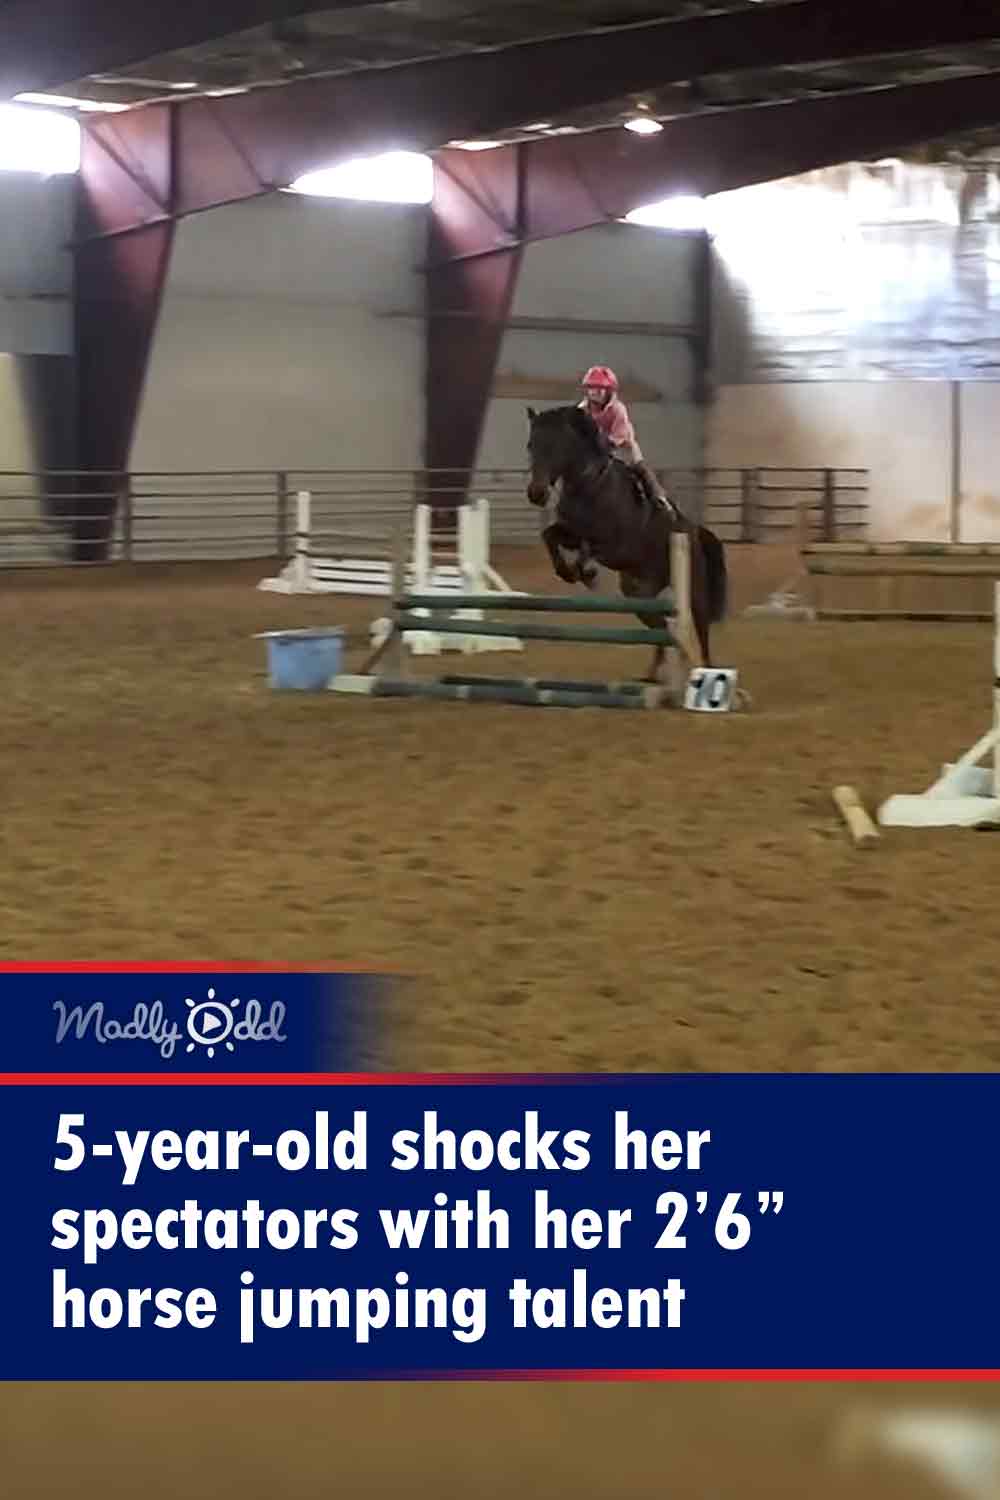 5-year-old shocks her spectators with her 2’6” horse jumping talent